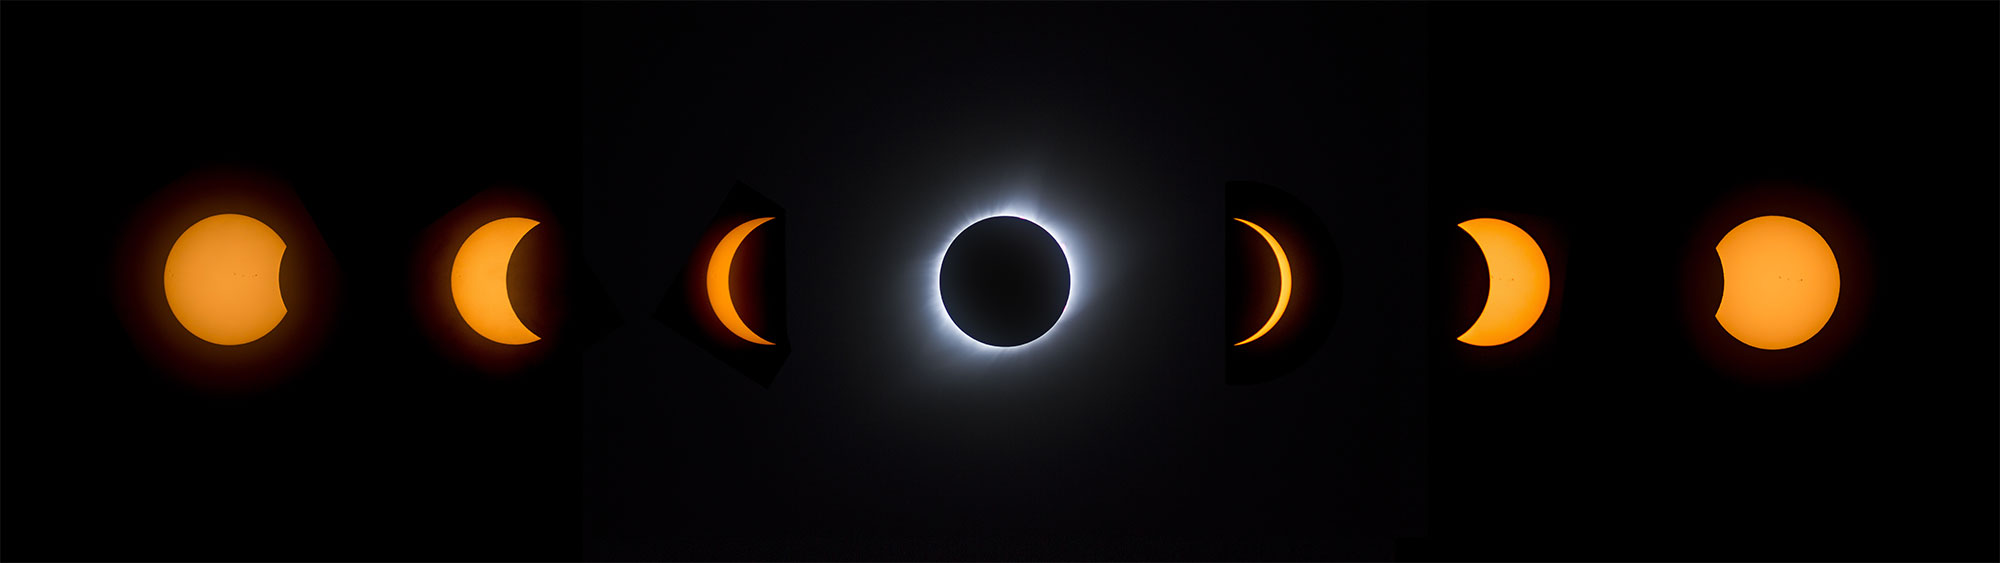 Phase progression of the eclipse